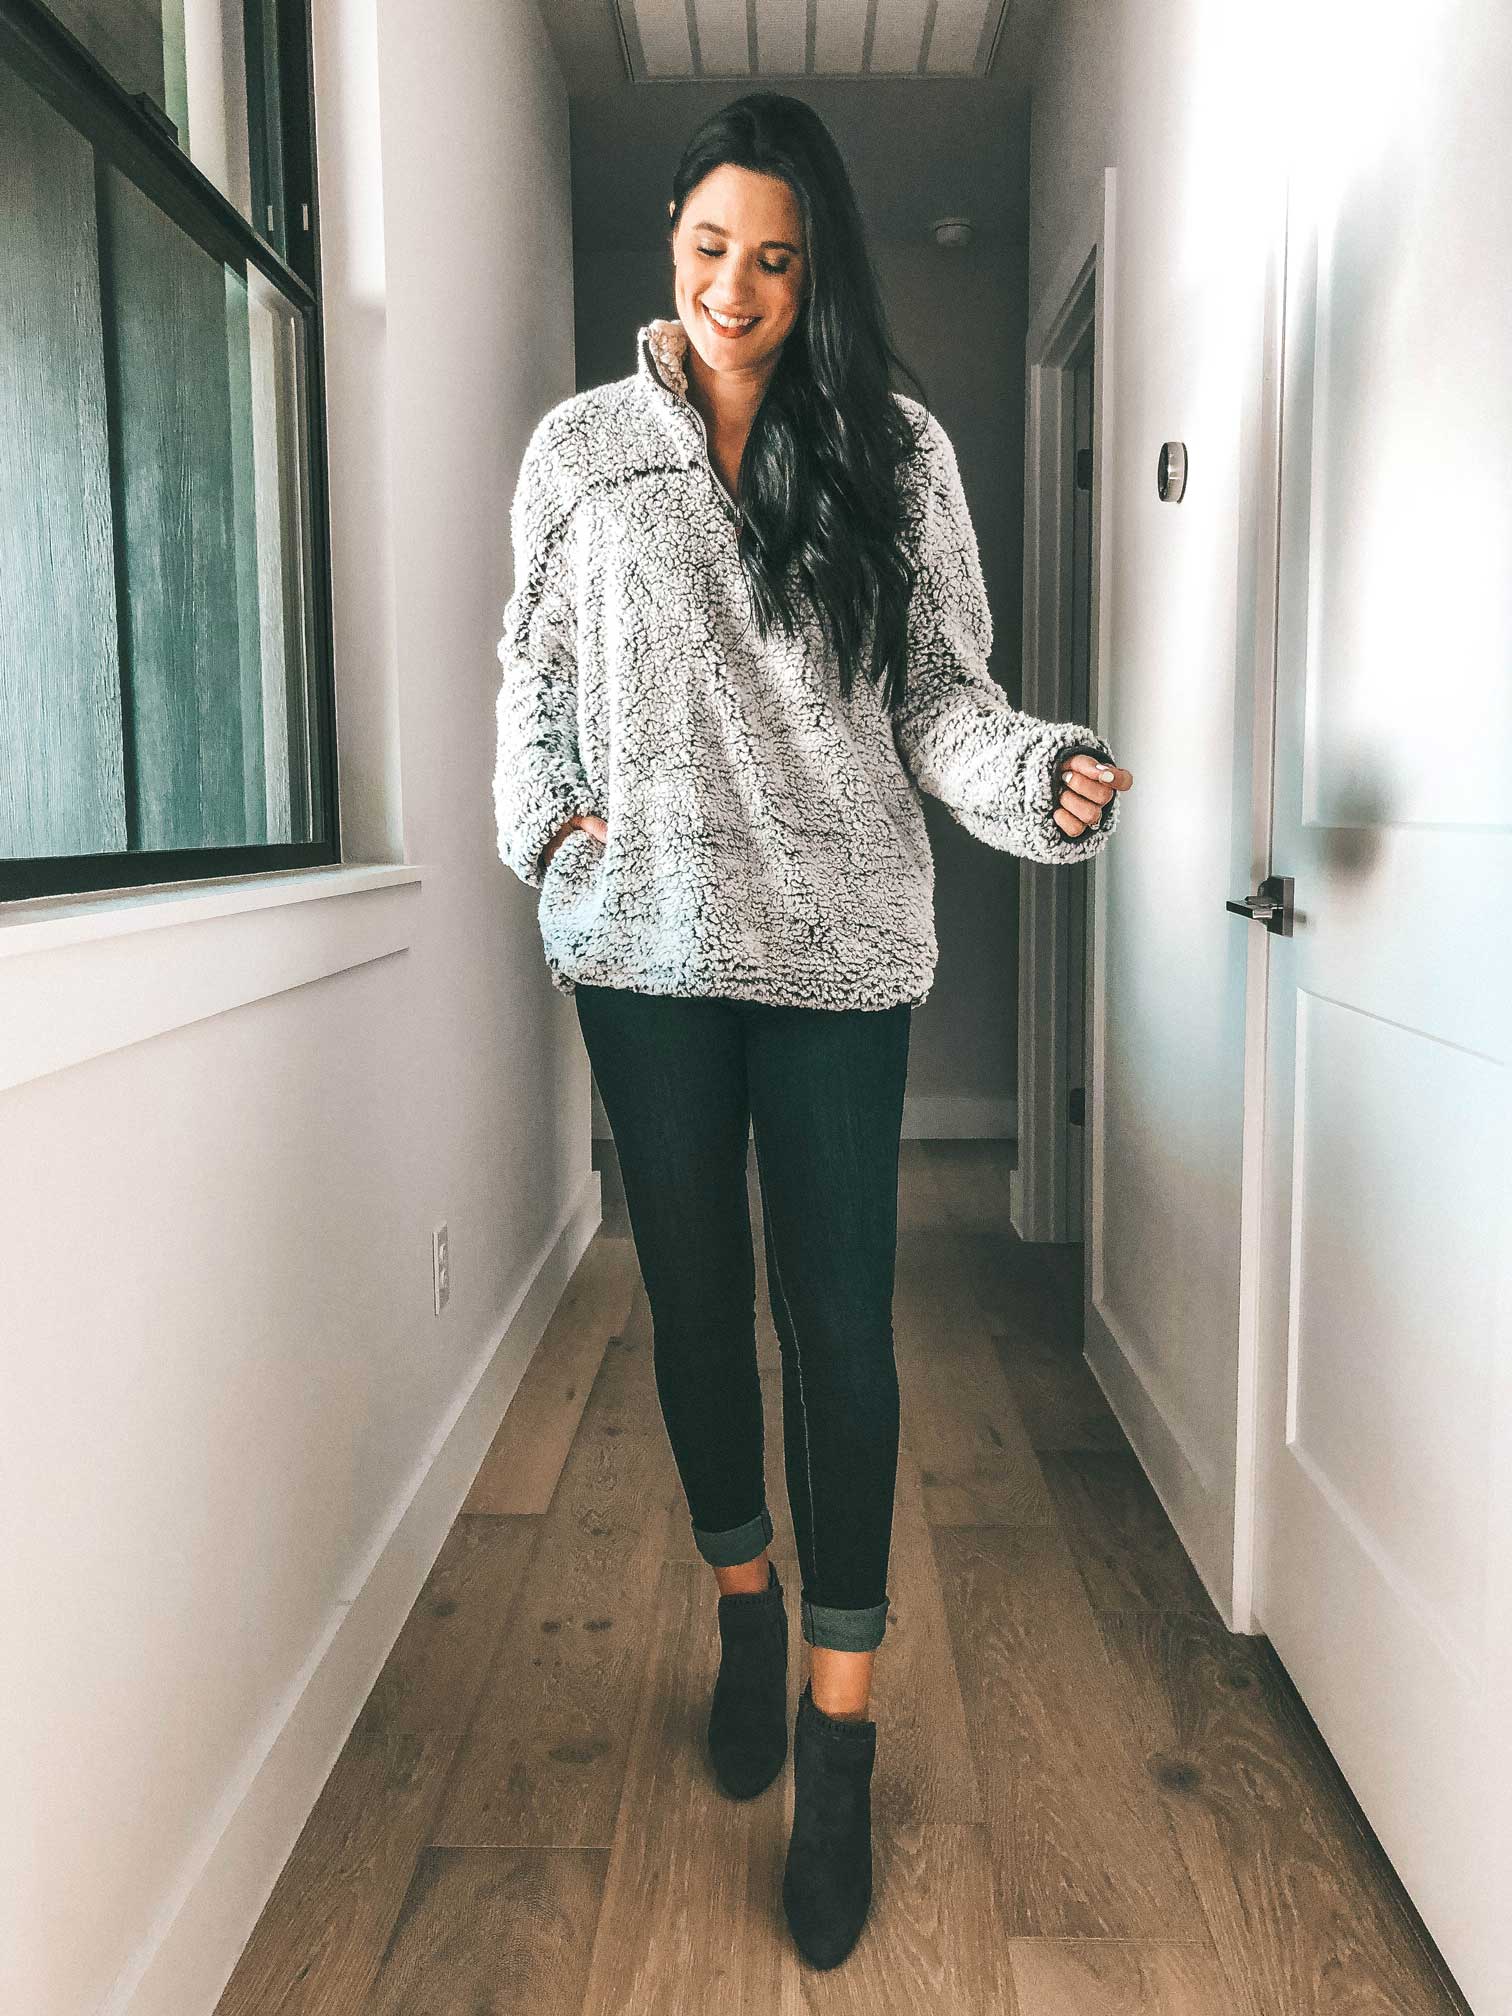 DTKAustin shares her 7 must have items from the 2018 Nordstrom Anniversary Sale NSALE. - Nordstrom Anniversary Sale Must Haves featured by popular Austin fashion blogger, Dressed to Kill || DTK Austin #nsale #nordstrom #anniversarysale #nordstromsale #fashion #style #fallstyle #winterstyle #womensoutfits #dtkaustin